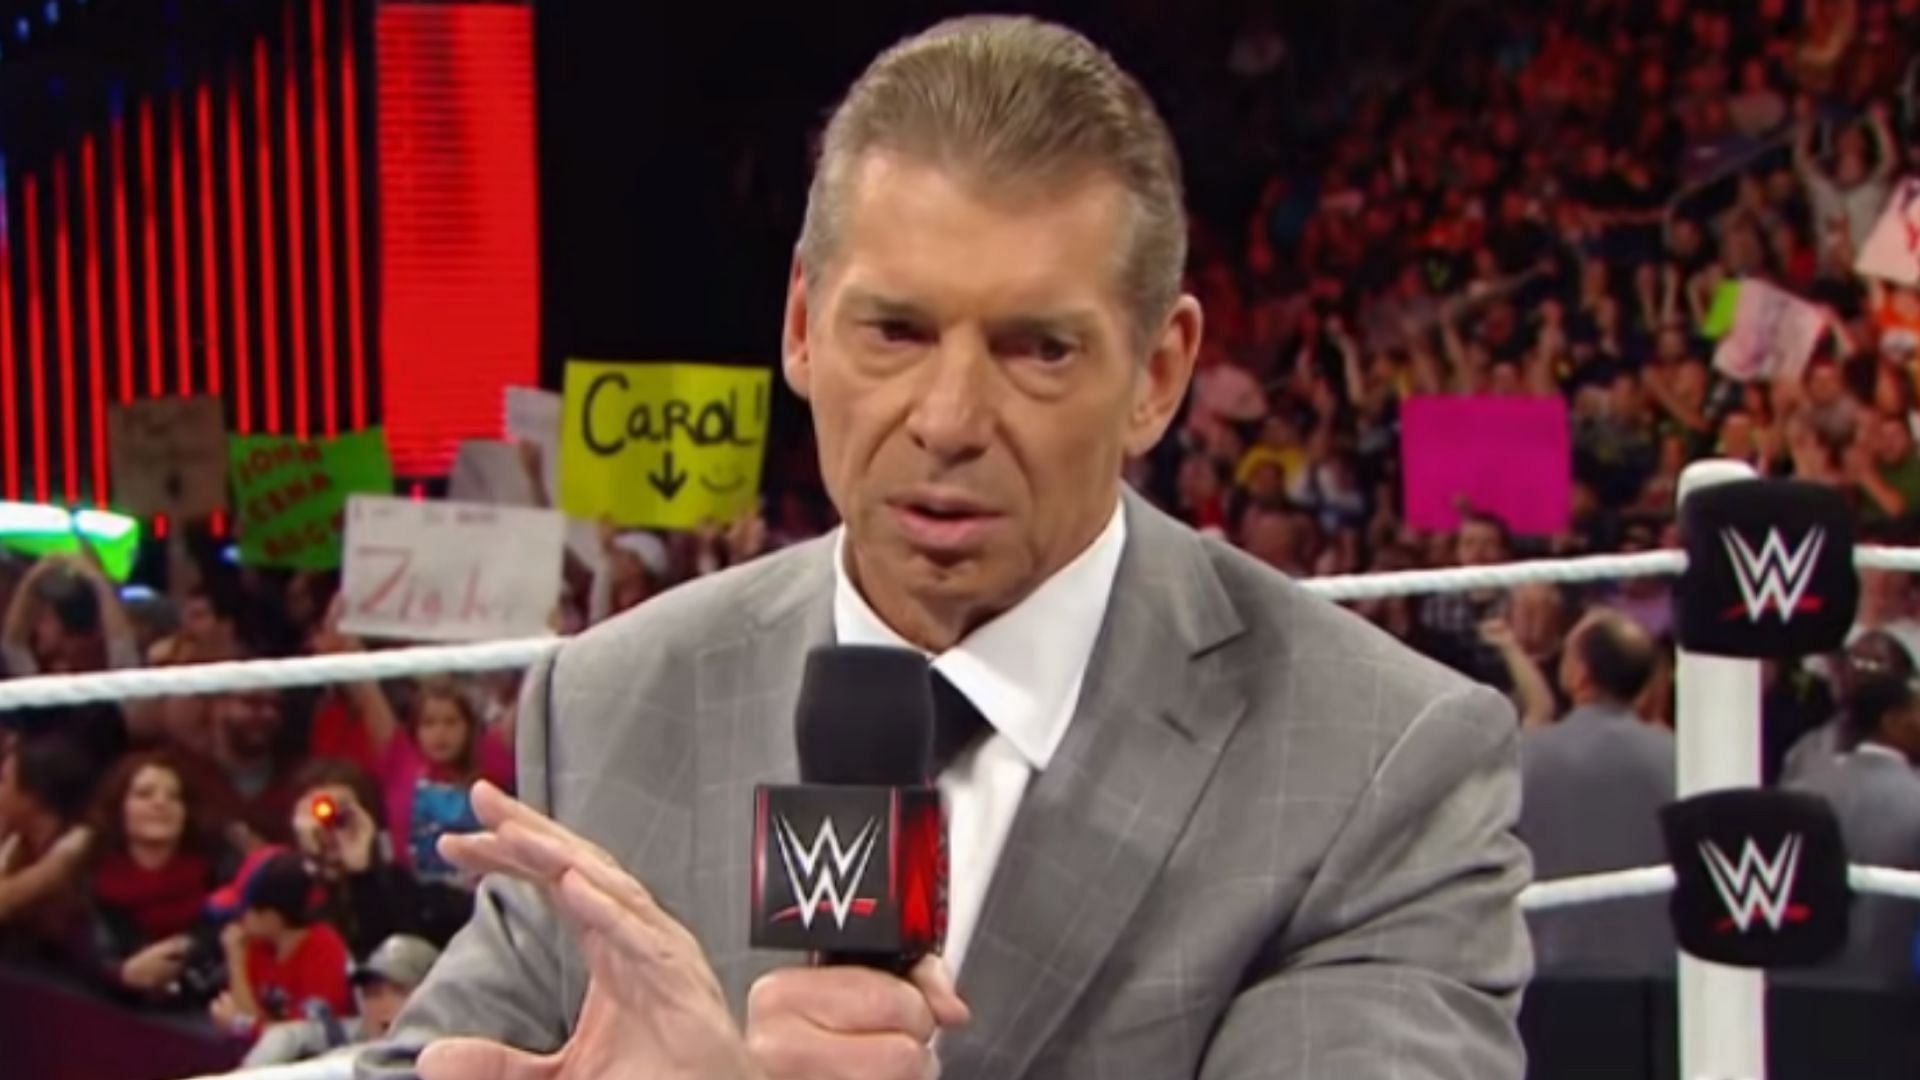 Vince McMahon did not tell Jim Ross about the Bret Hart vs. Shawn Michaels finish.